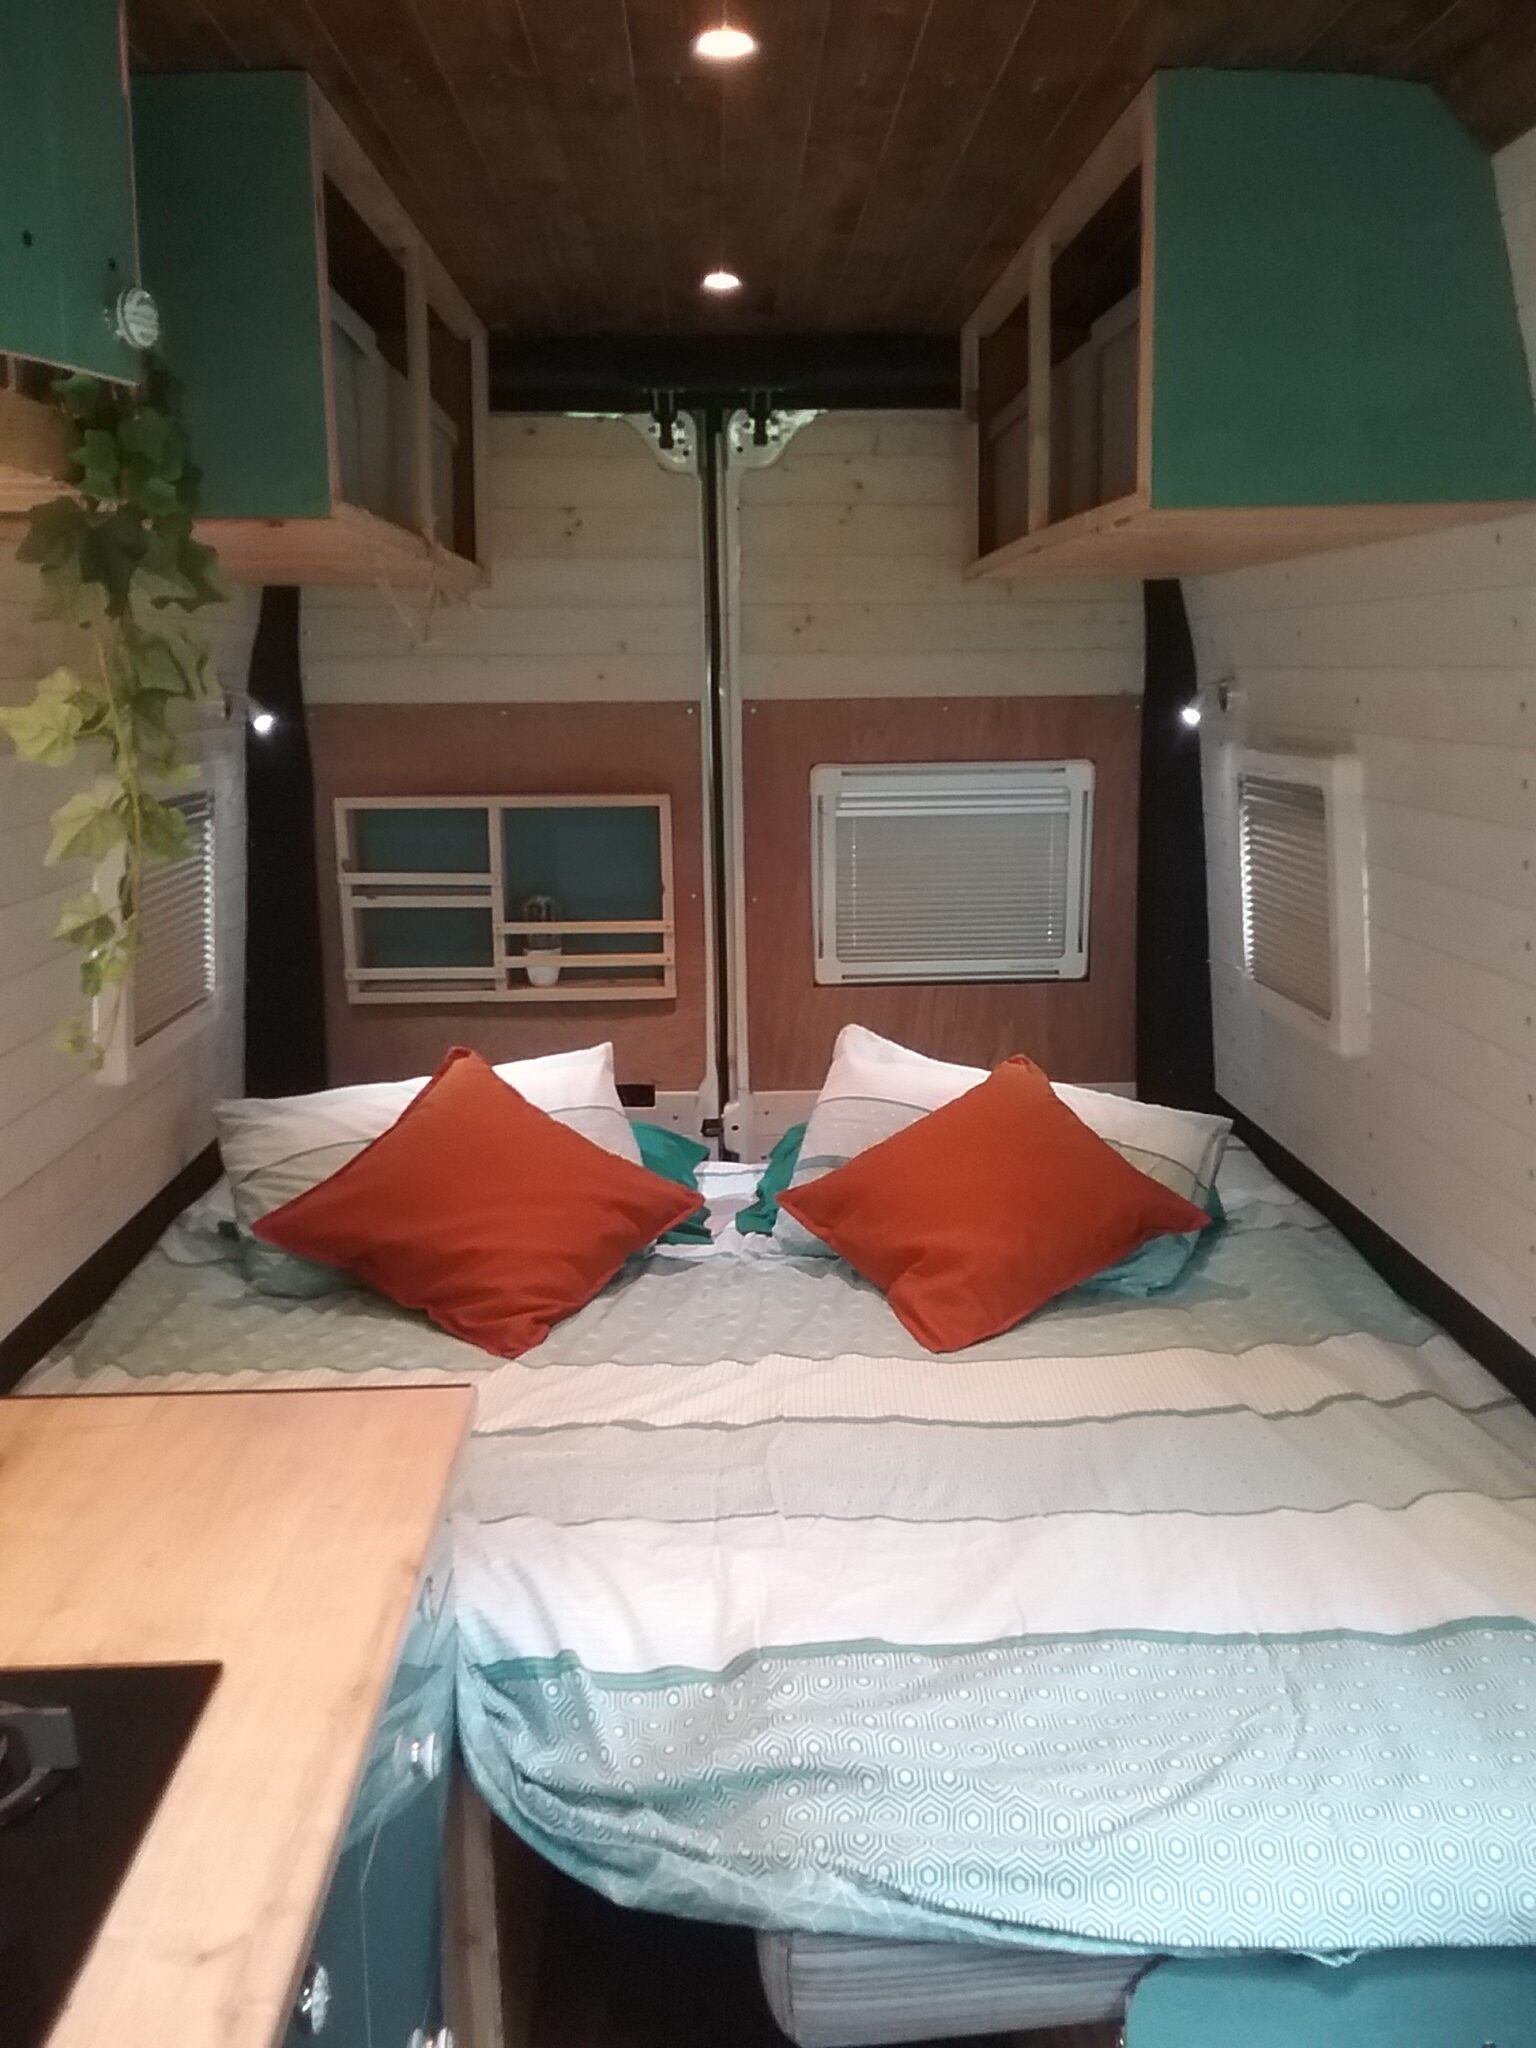 A cozy camper van interior featuring a neatly made bed with white and teal bedding. The bed is adorned with two white pillows and two orange cushions. Above the bed are teal overhead storage compartments. There is a small plant hanging from the upper left corner, and a wooden countertop is partially visible on the left side.